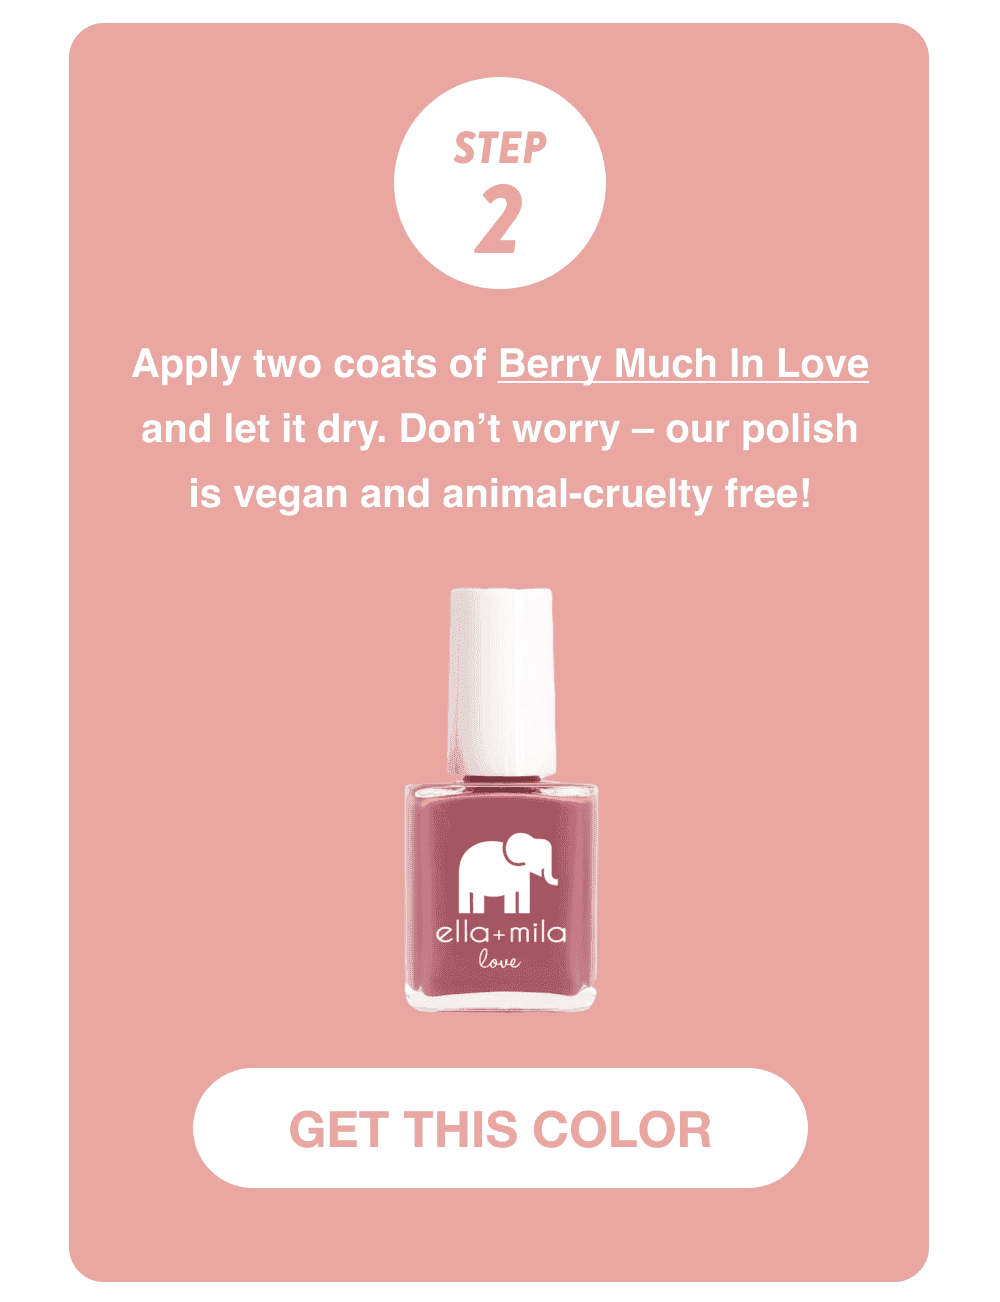 Step 2: Use Berry Much In Love